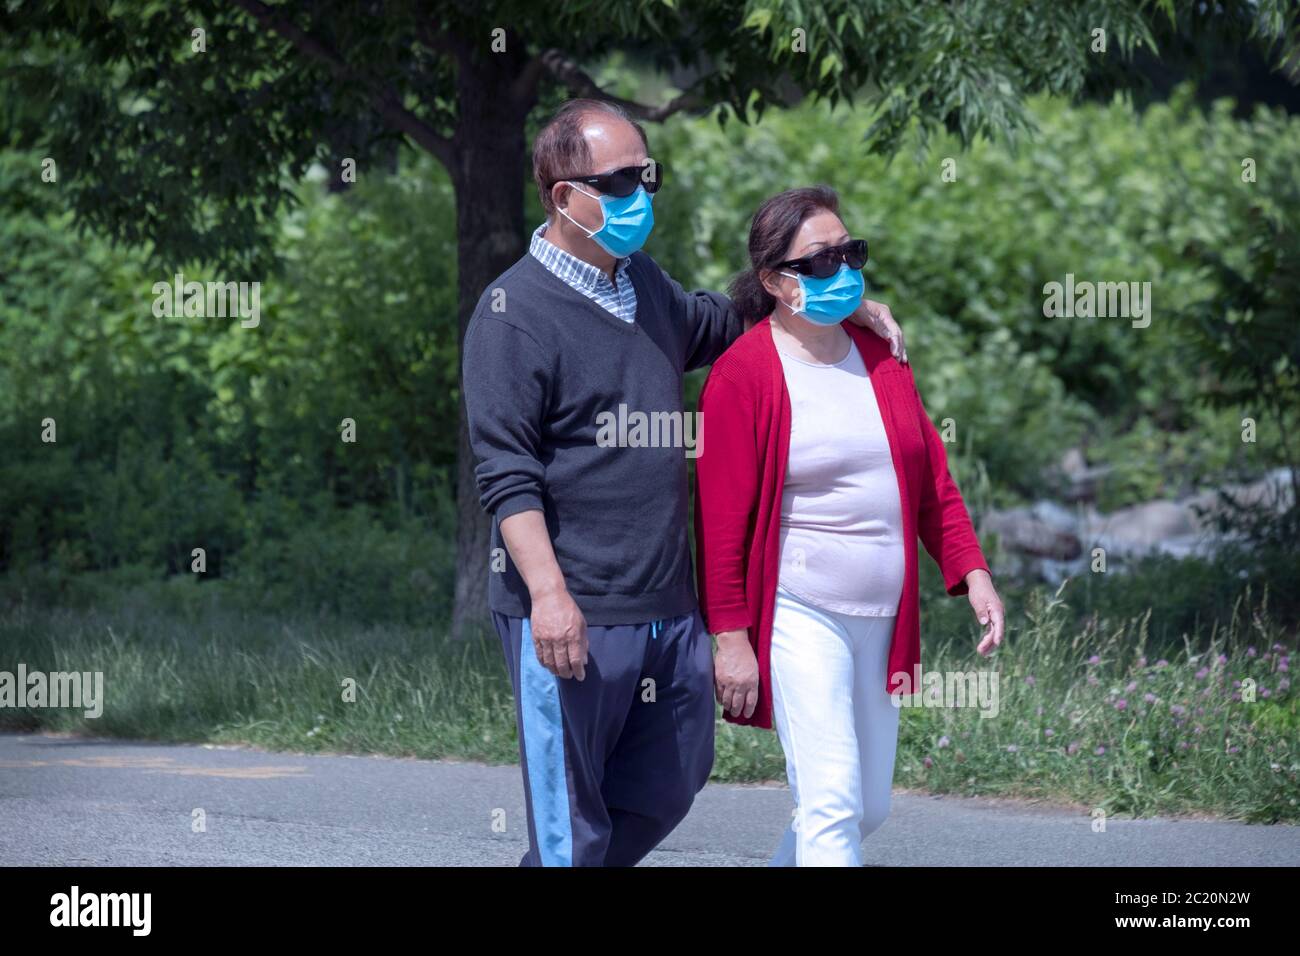 An Asian American couple, likely Korean Americans, on an exercise walk on a path in Little Bay Park in Whitestone, Queens, New York City. Stock Photo